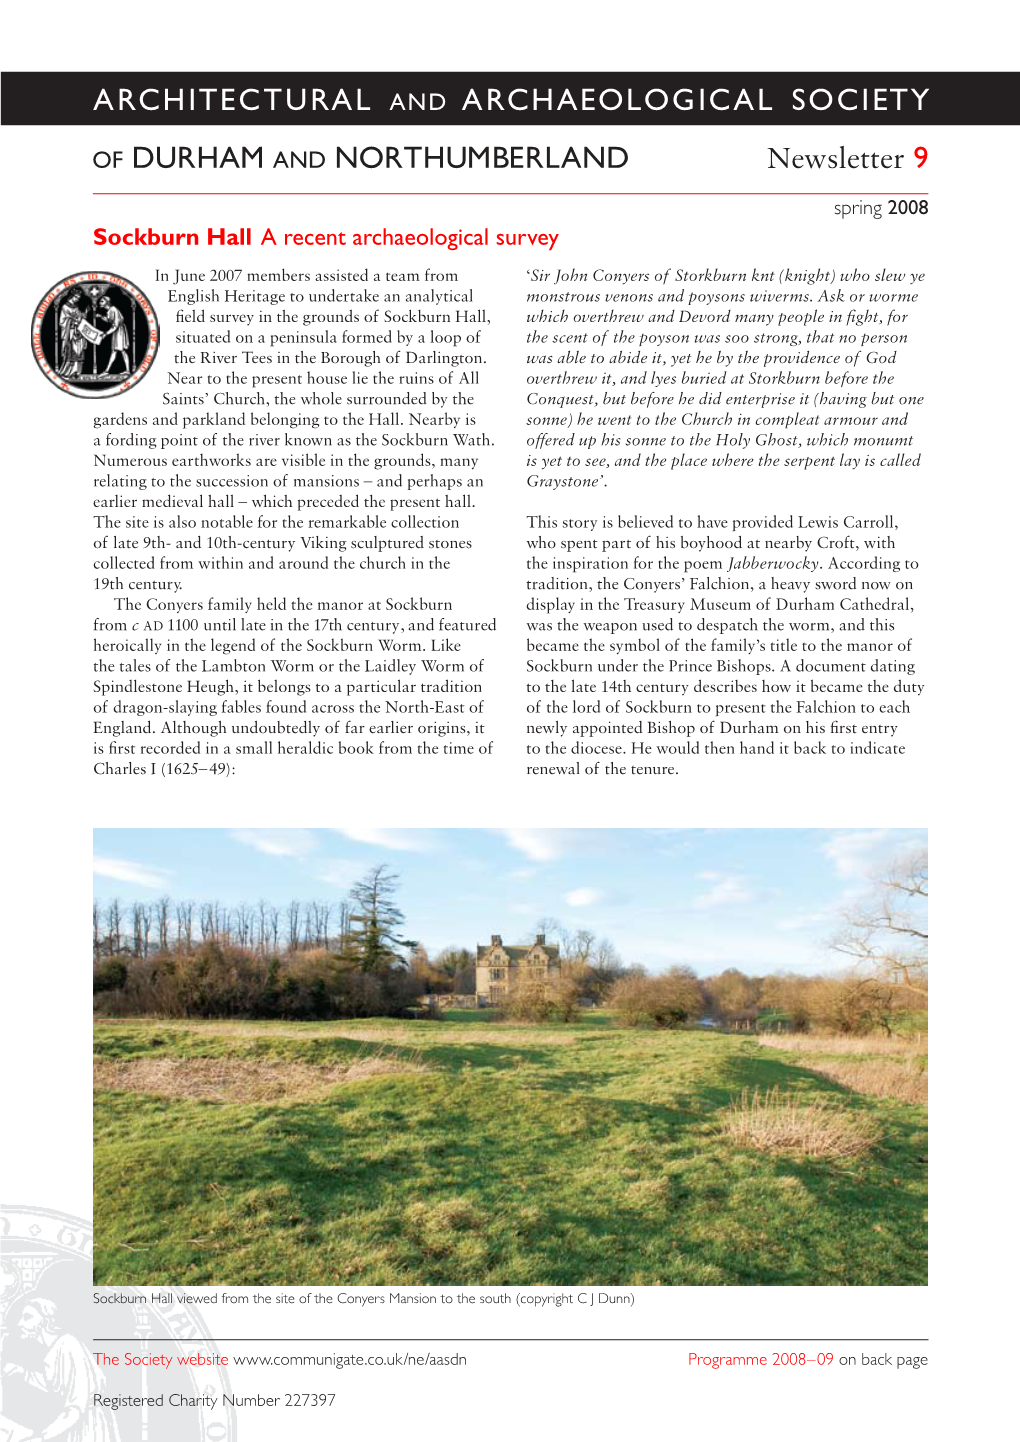 Architectural and Archaeological Society of Durham and Northumberland Newsletter 9 Spring 2008 Sockburn Hall a Recent Archaeological Survey